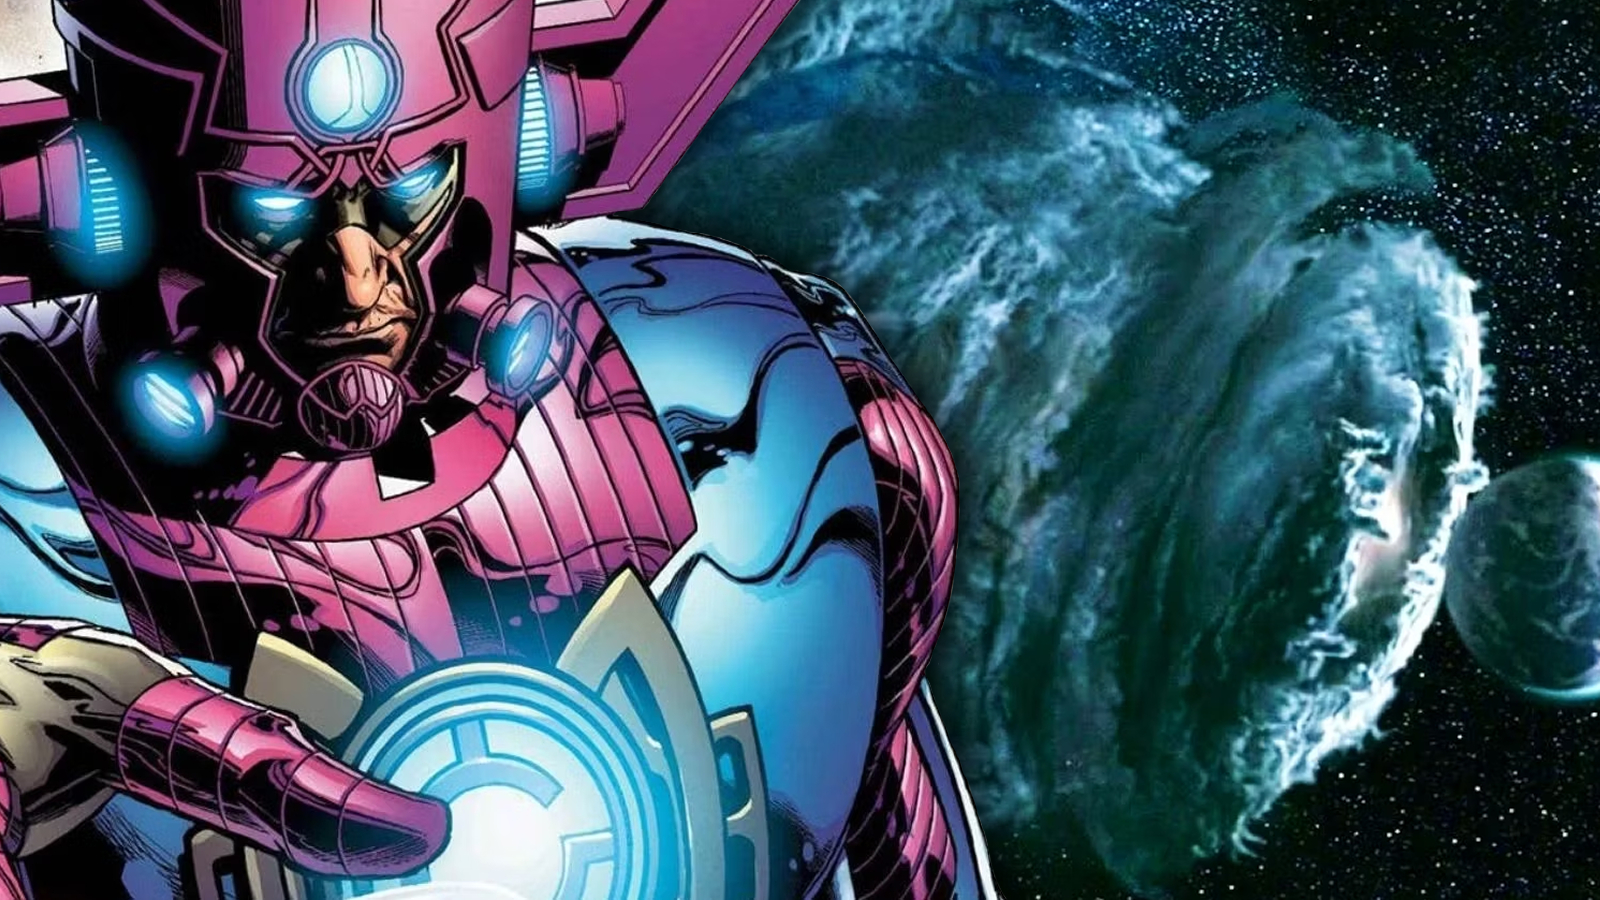 Galactus comics art combined with a still from Fantastic Four: The Rise of the Silver Surfer